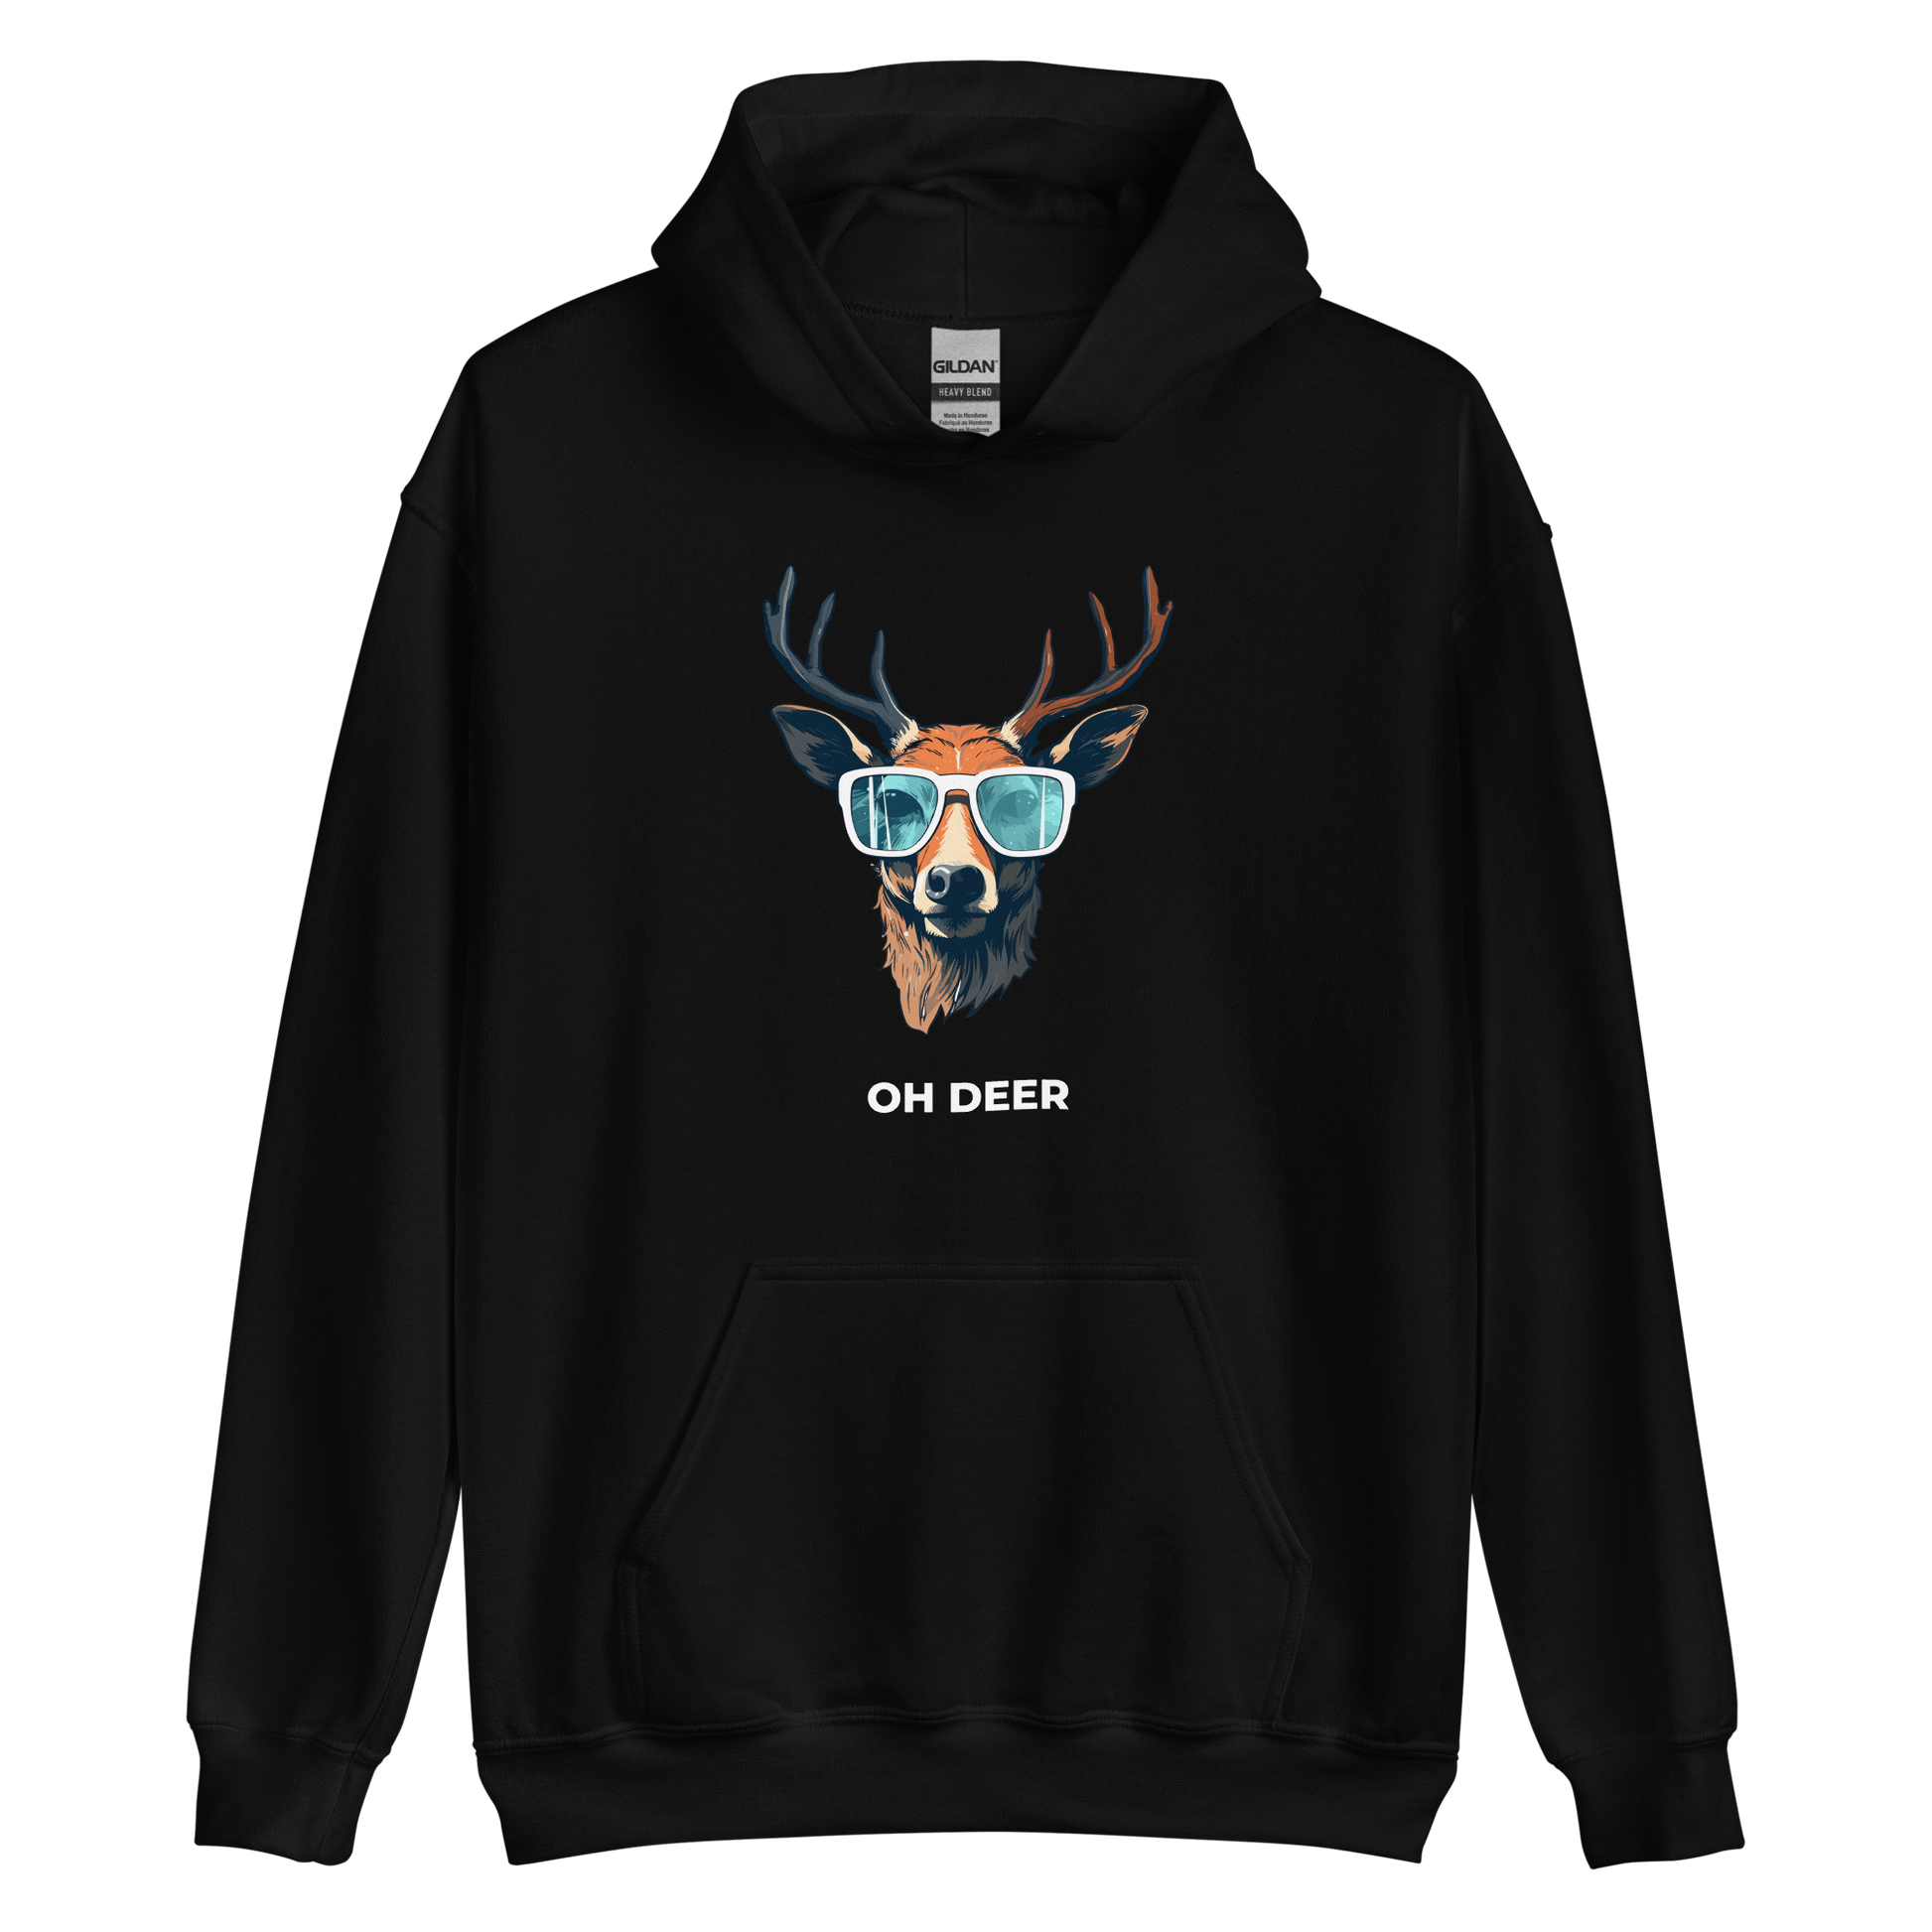 Black Deer Hoodie featuring a hilarious Oh Deer graphic on the chest - Funny Graphic Deer Hoodies - Boozy Fox